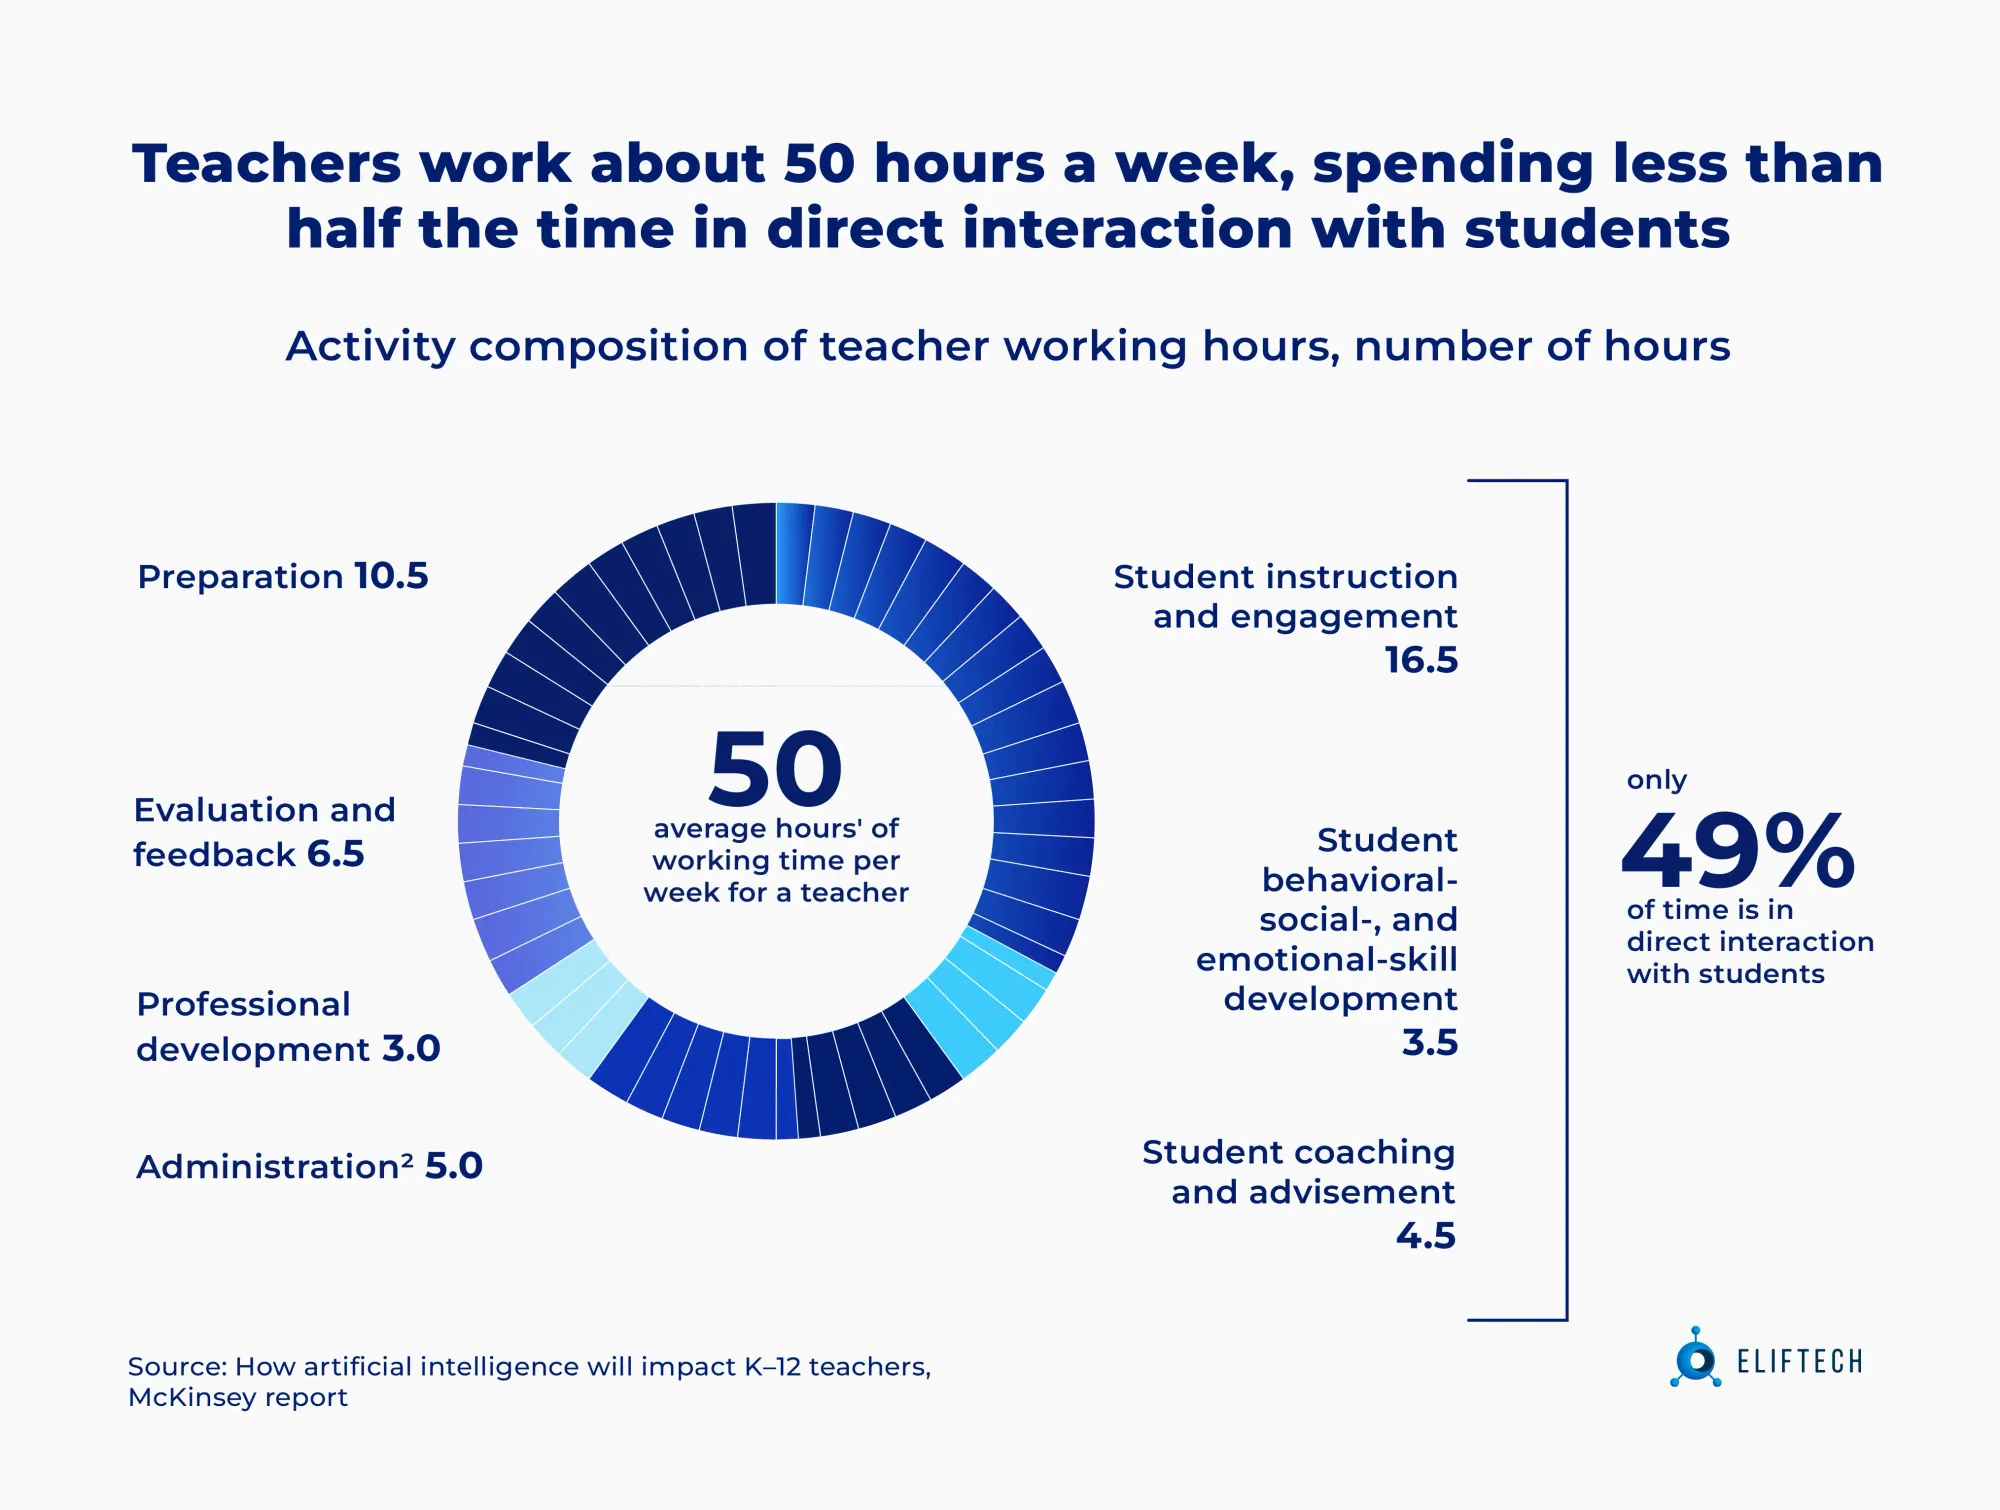 Teachers workload time distribution: only 49% of time is in interaction with students